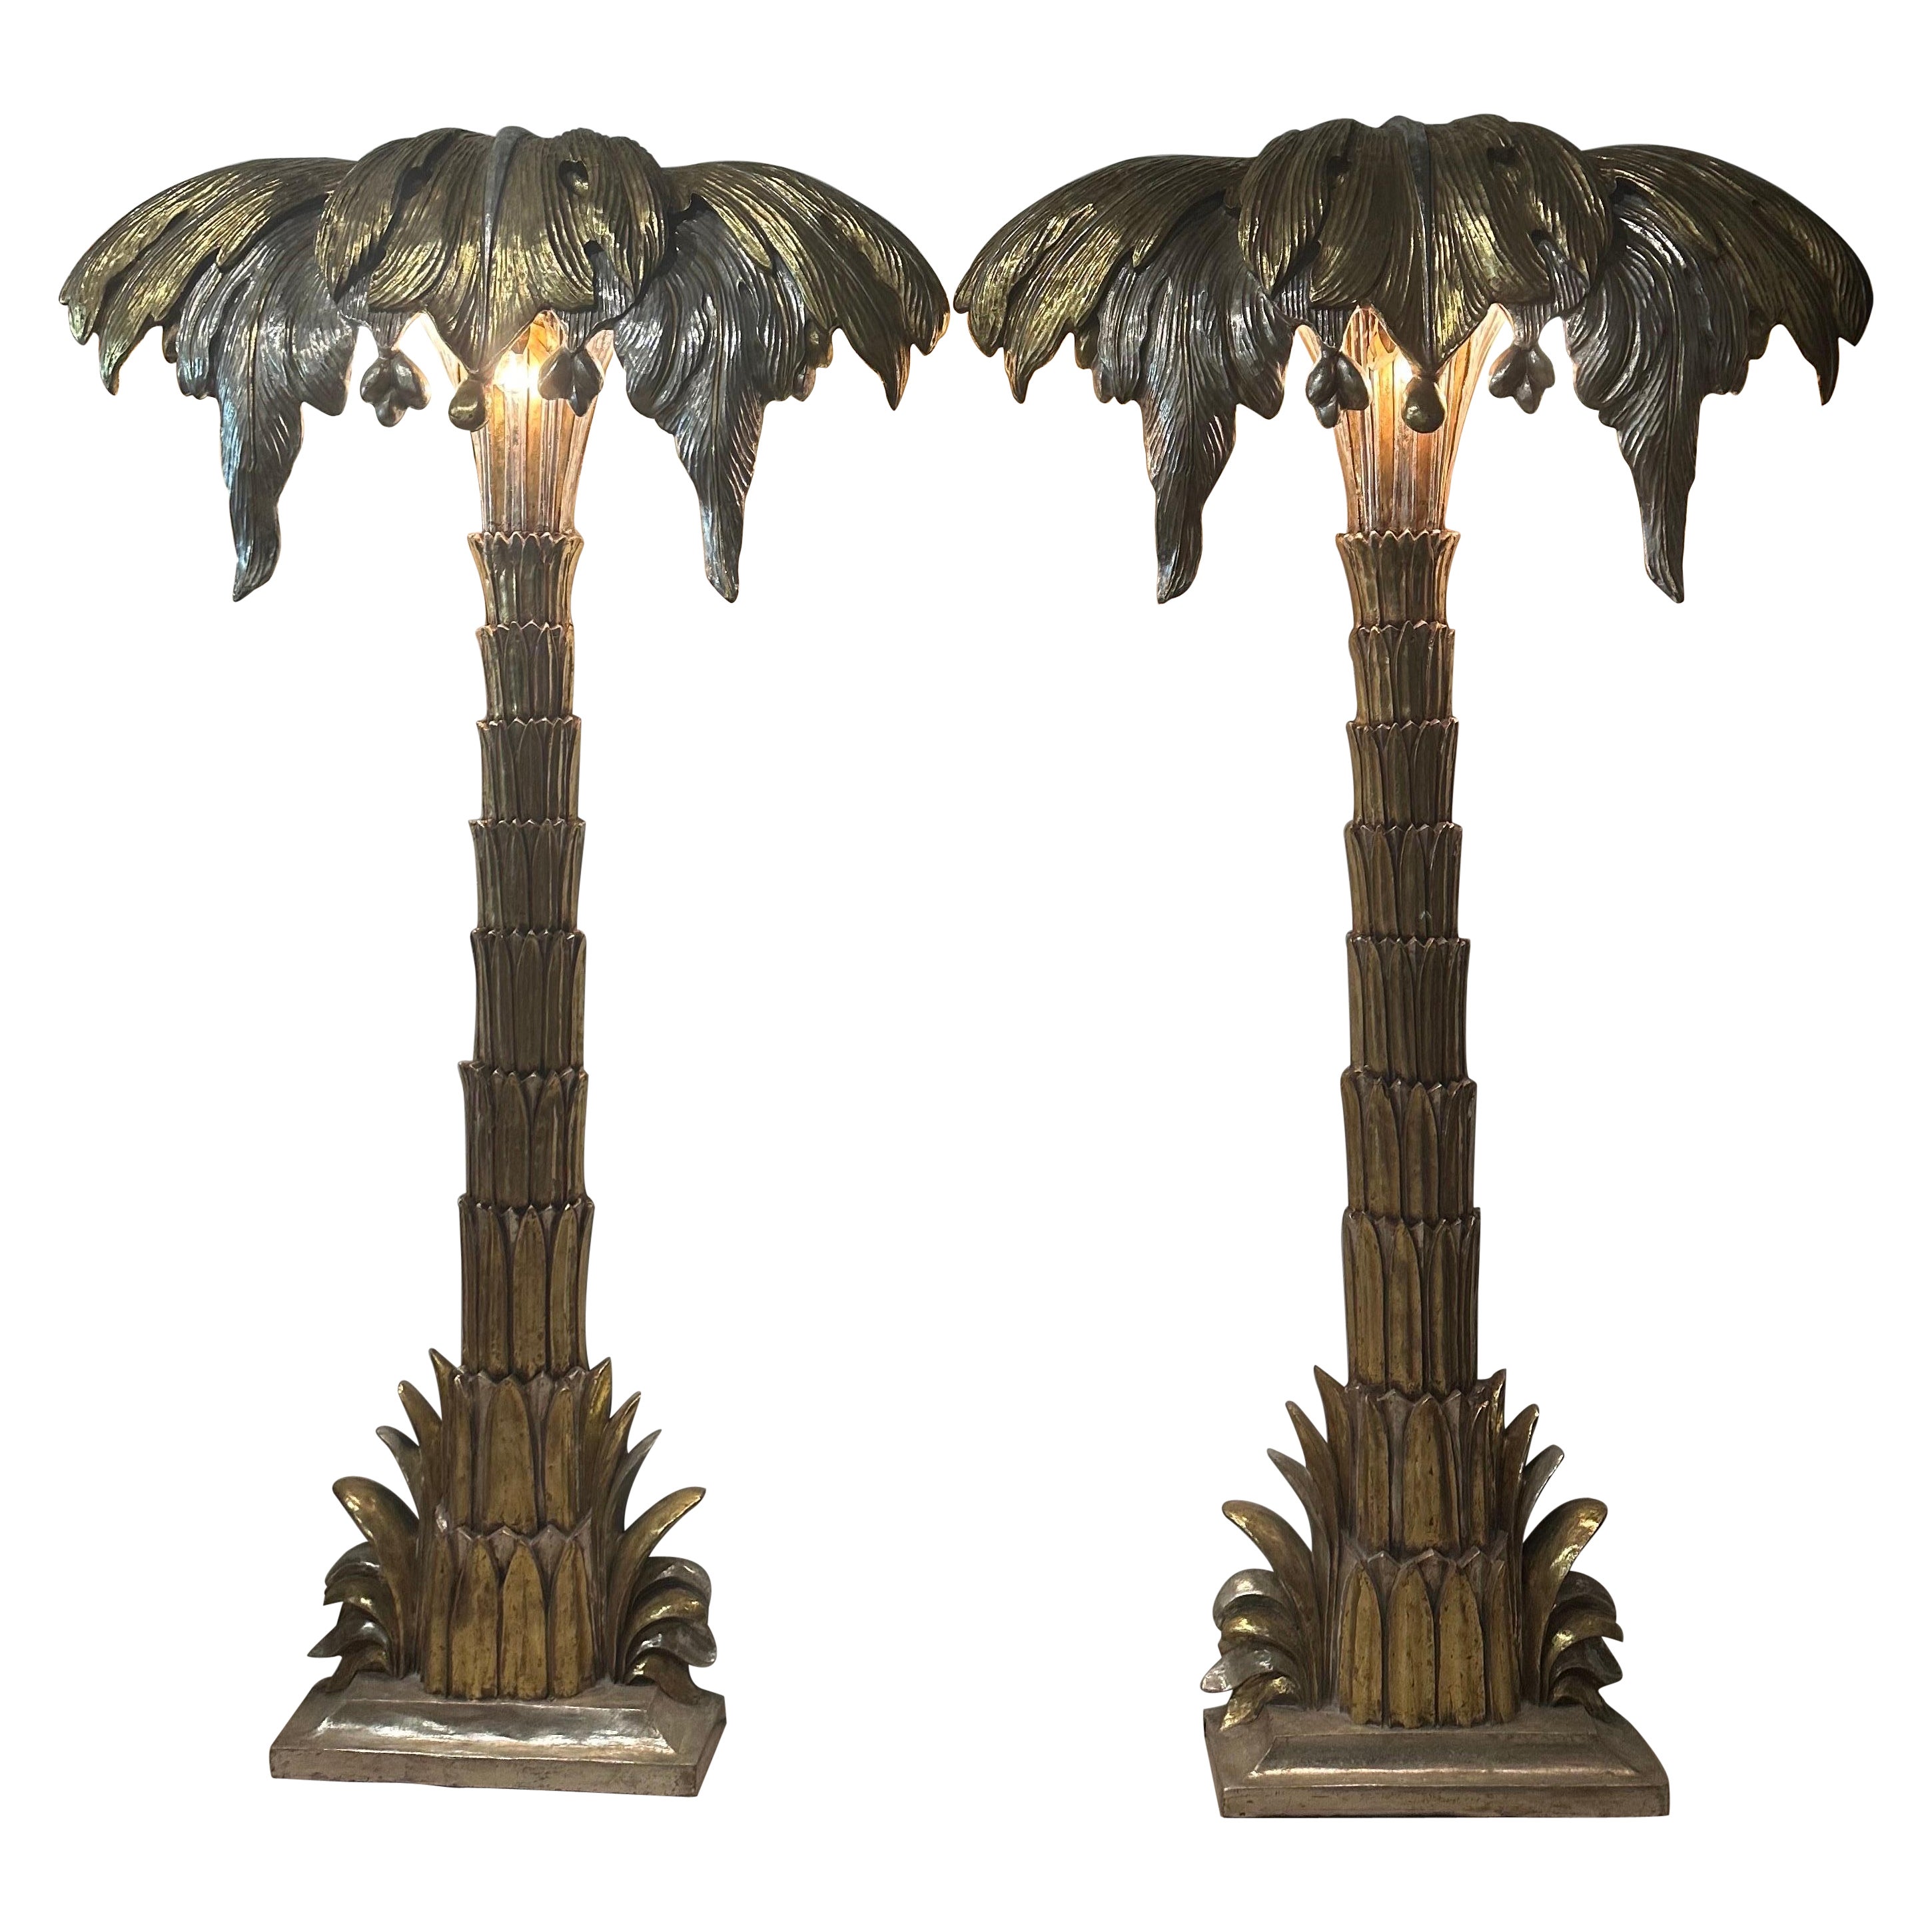  Pair French Maison Jansen Palm Tree Gold Silver Gilt Floor Wall Light Sconces For Sale